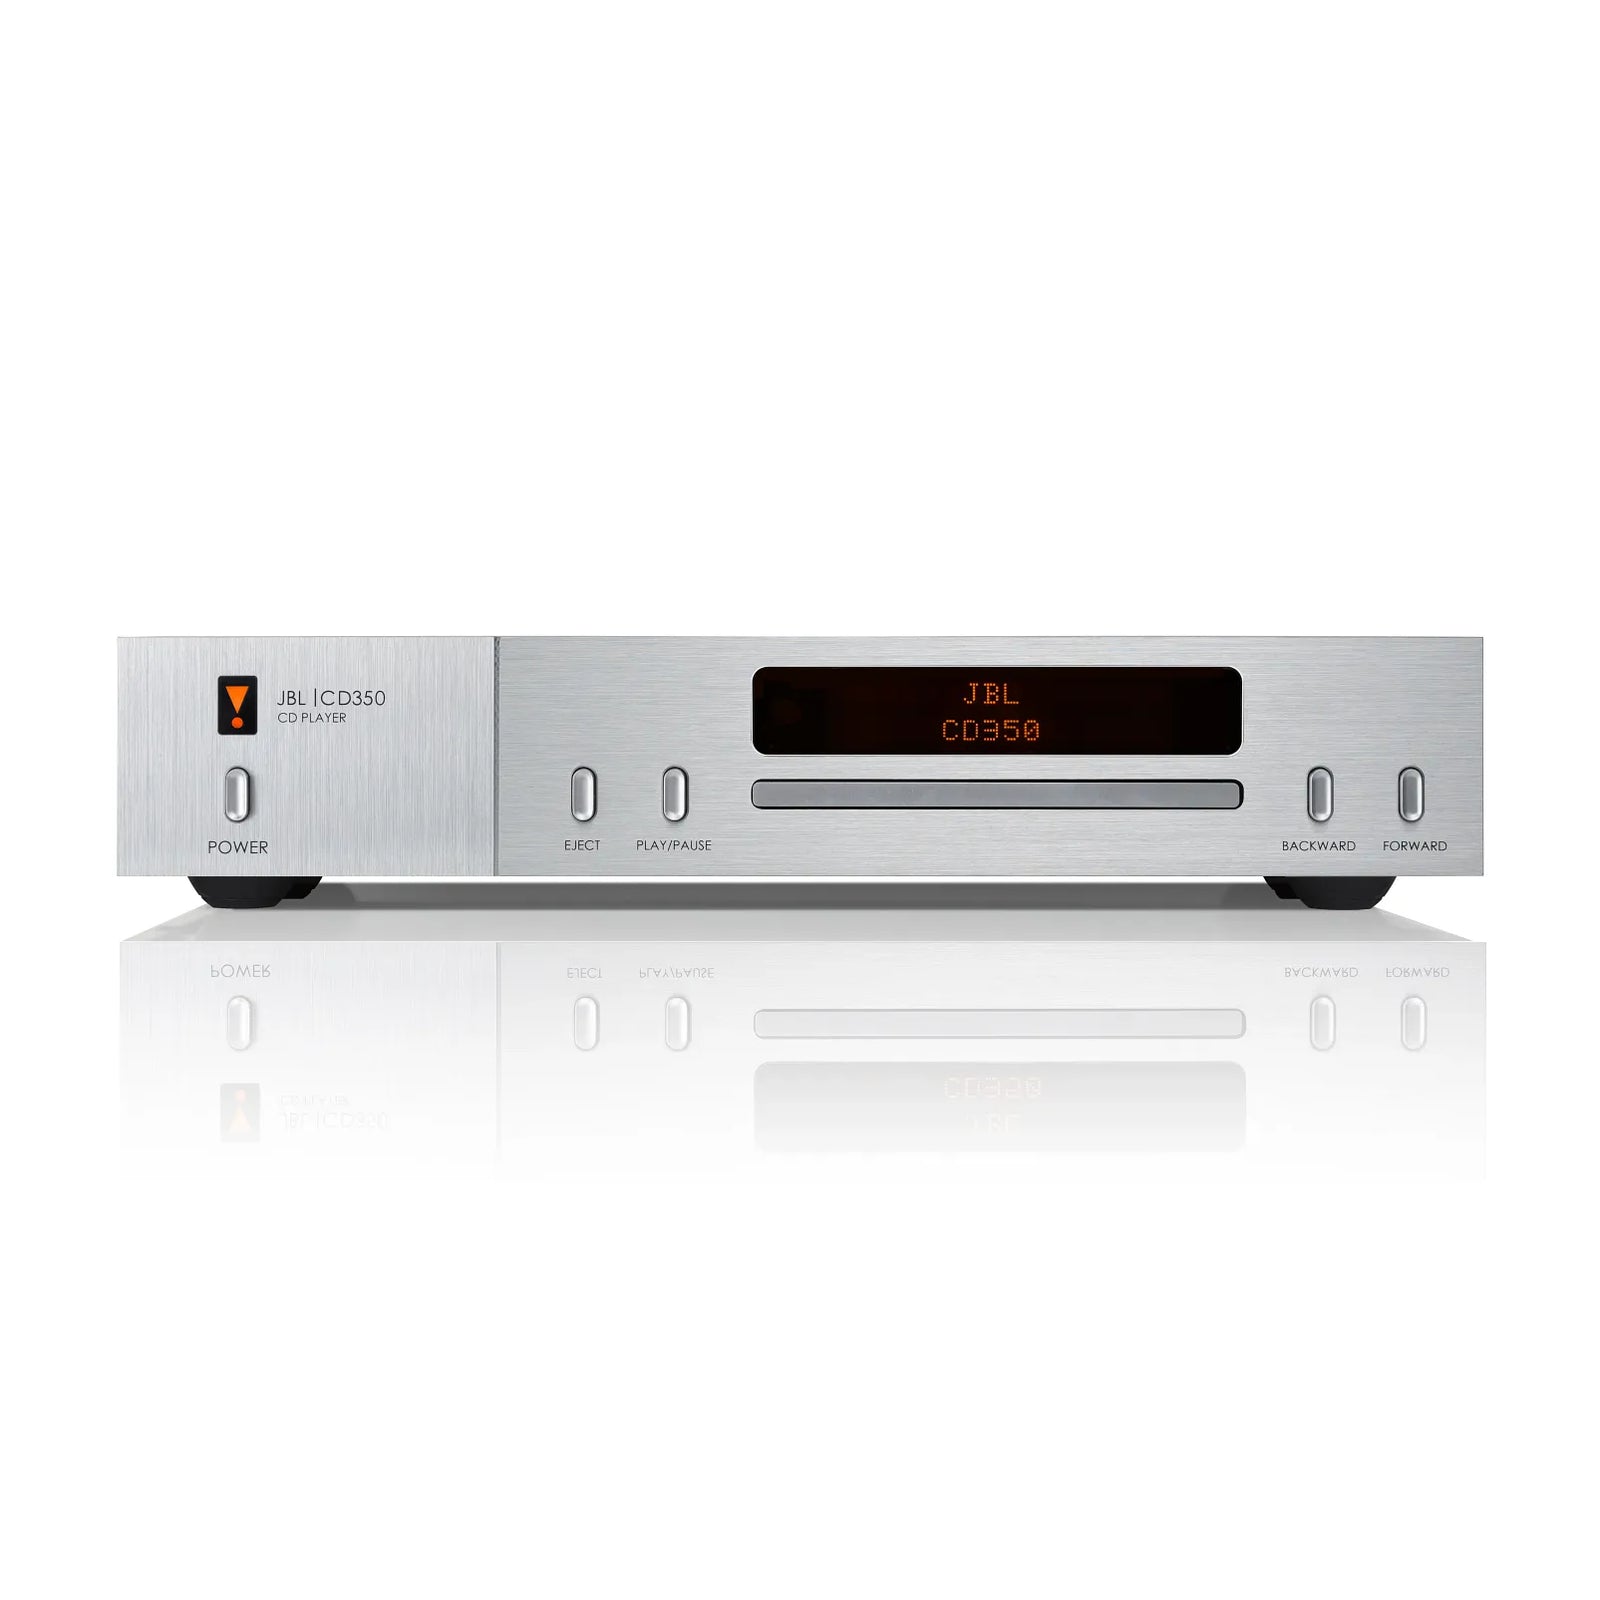 JBL CD350 Classic Compact Disc Player Enjoy your favourite album or mix CD with the JBL CD350 Classic. The JBL CD350 Classic is inspired by the JBL SA600 amplifier from the 1960’s, with retro styling and walnut veneer side panels to make the CD350 Classic the perfect partner for classic and retro Hi-Fi systems.